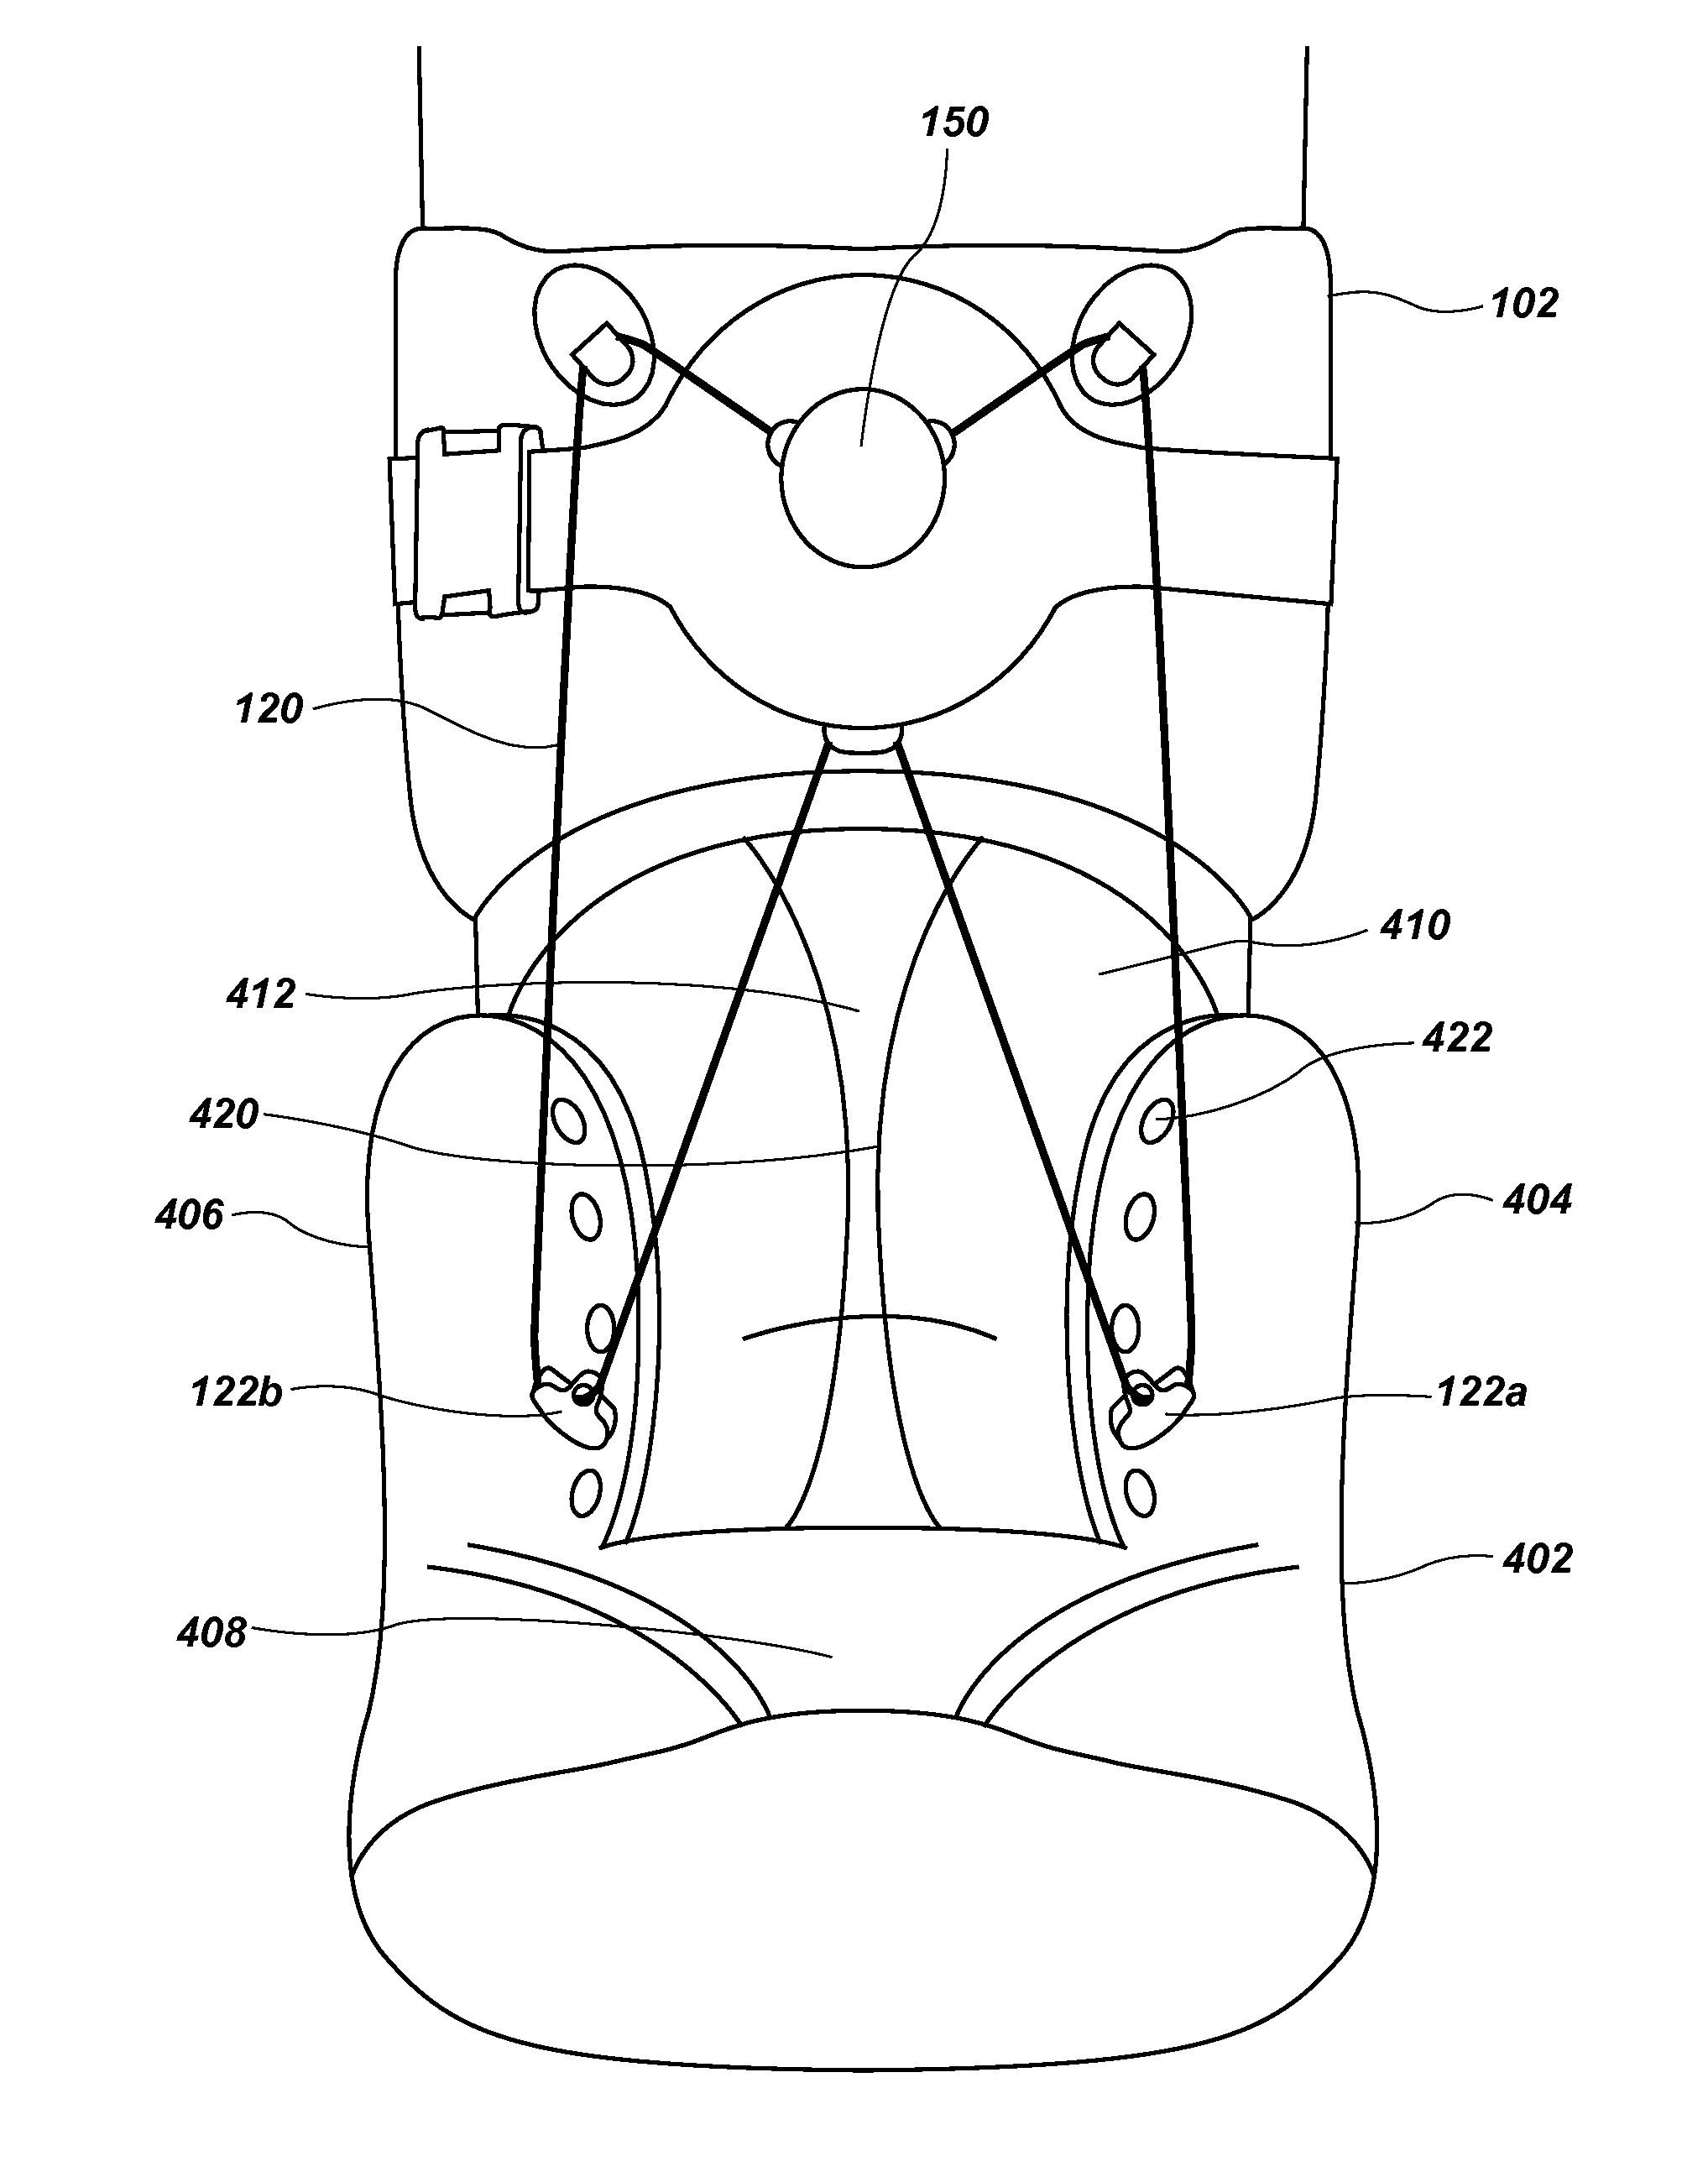 Orthotic device, system and methods for addressing foot drop